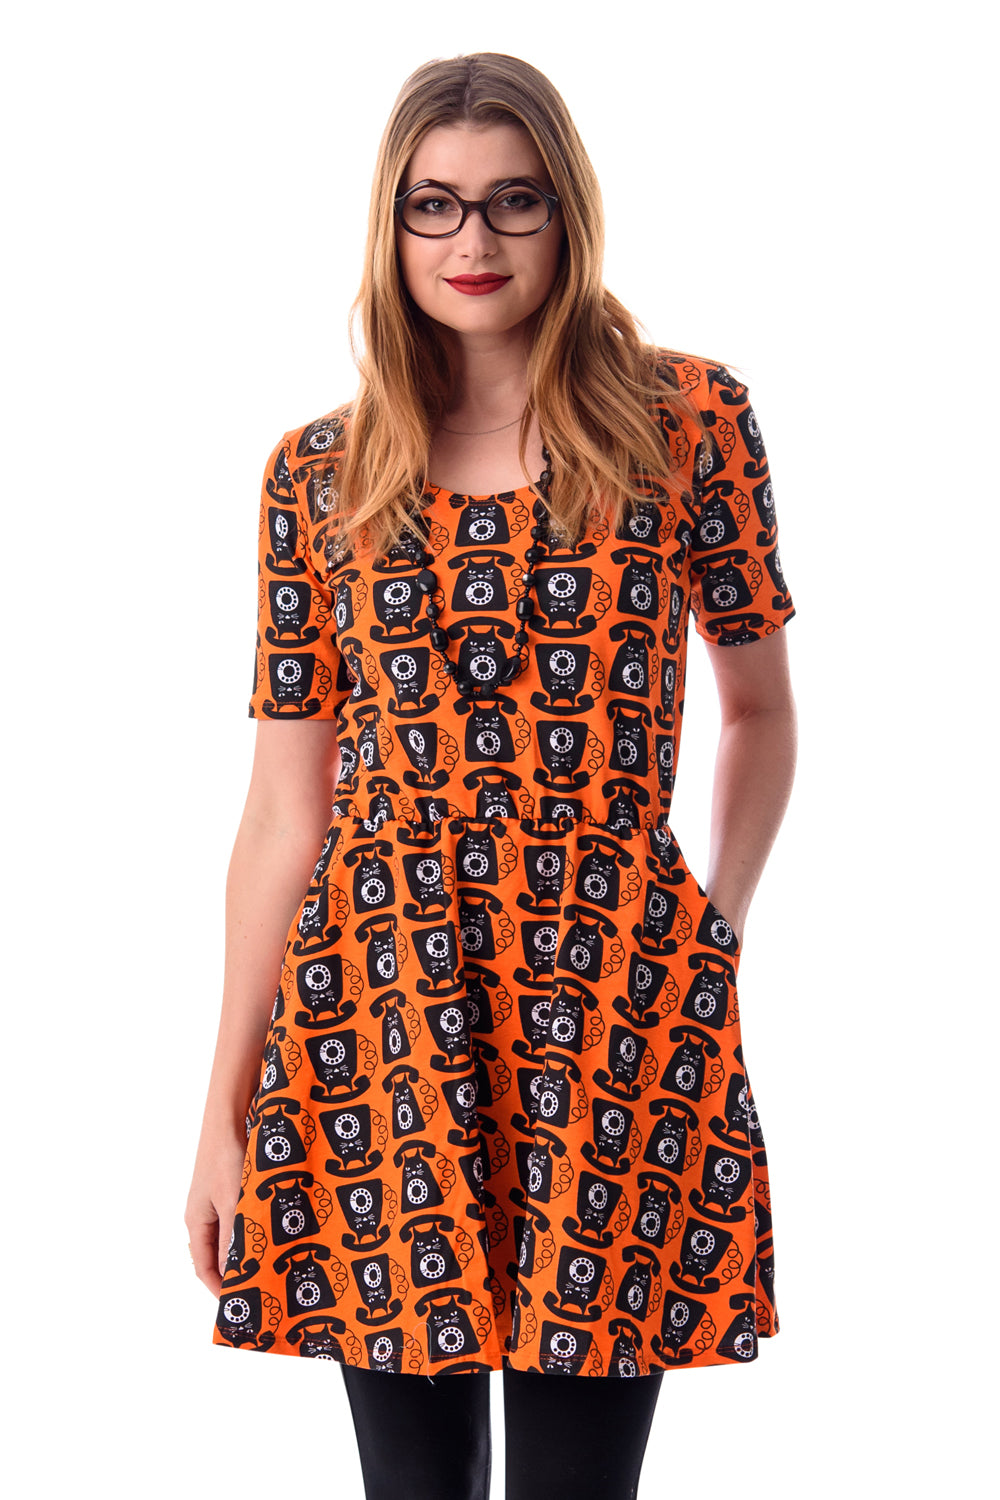 Orange black and white cat phone print knit skater dress with elbow length sleeves, pockets and elastic waist